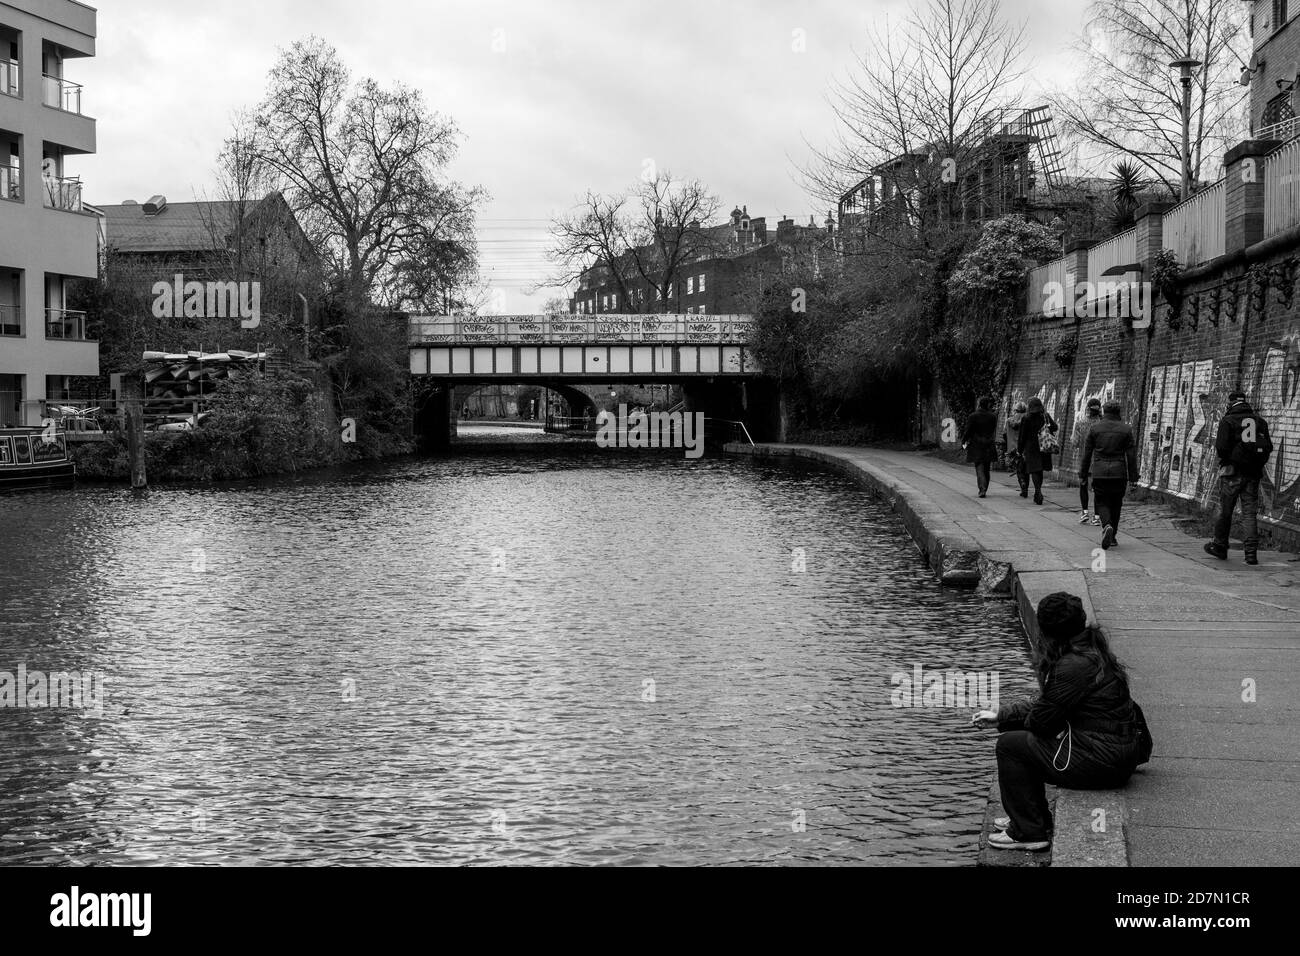 London: Regent's canal in Camden town Stock Photo